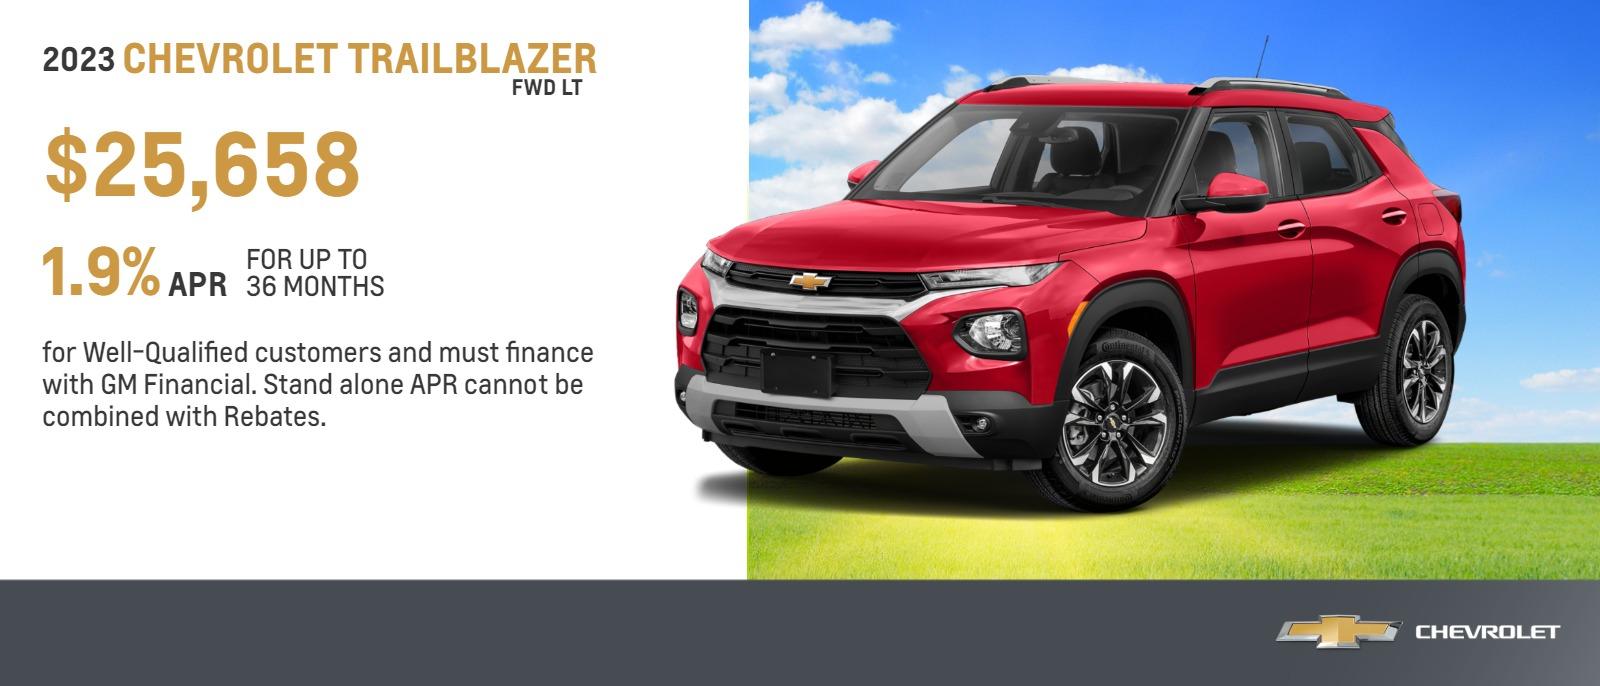 $25,658
1.9% APR for upto 36 Months for Well-Qualified customers and must finance with GM Financial. Stand alone APR cannot be combined with Rebates.